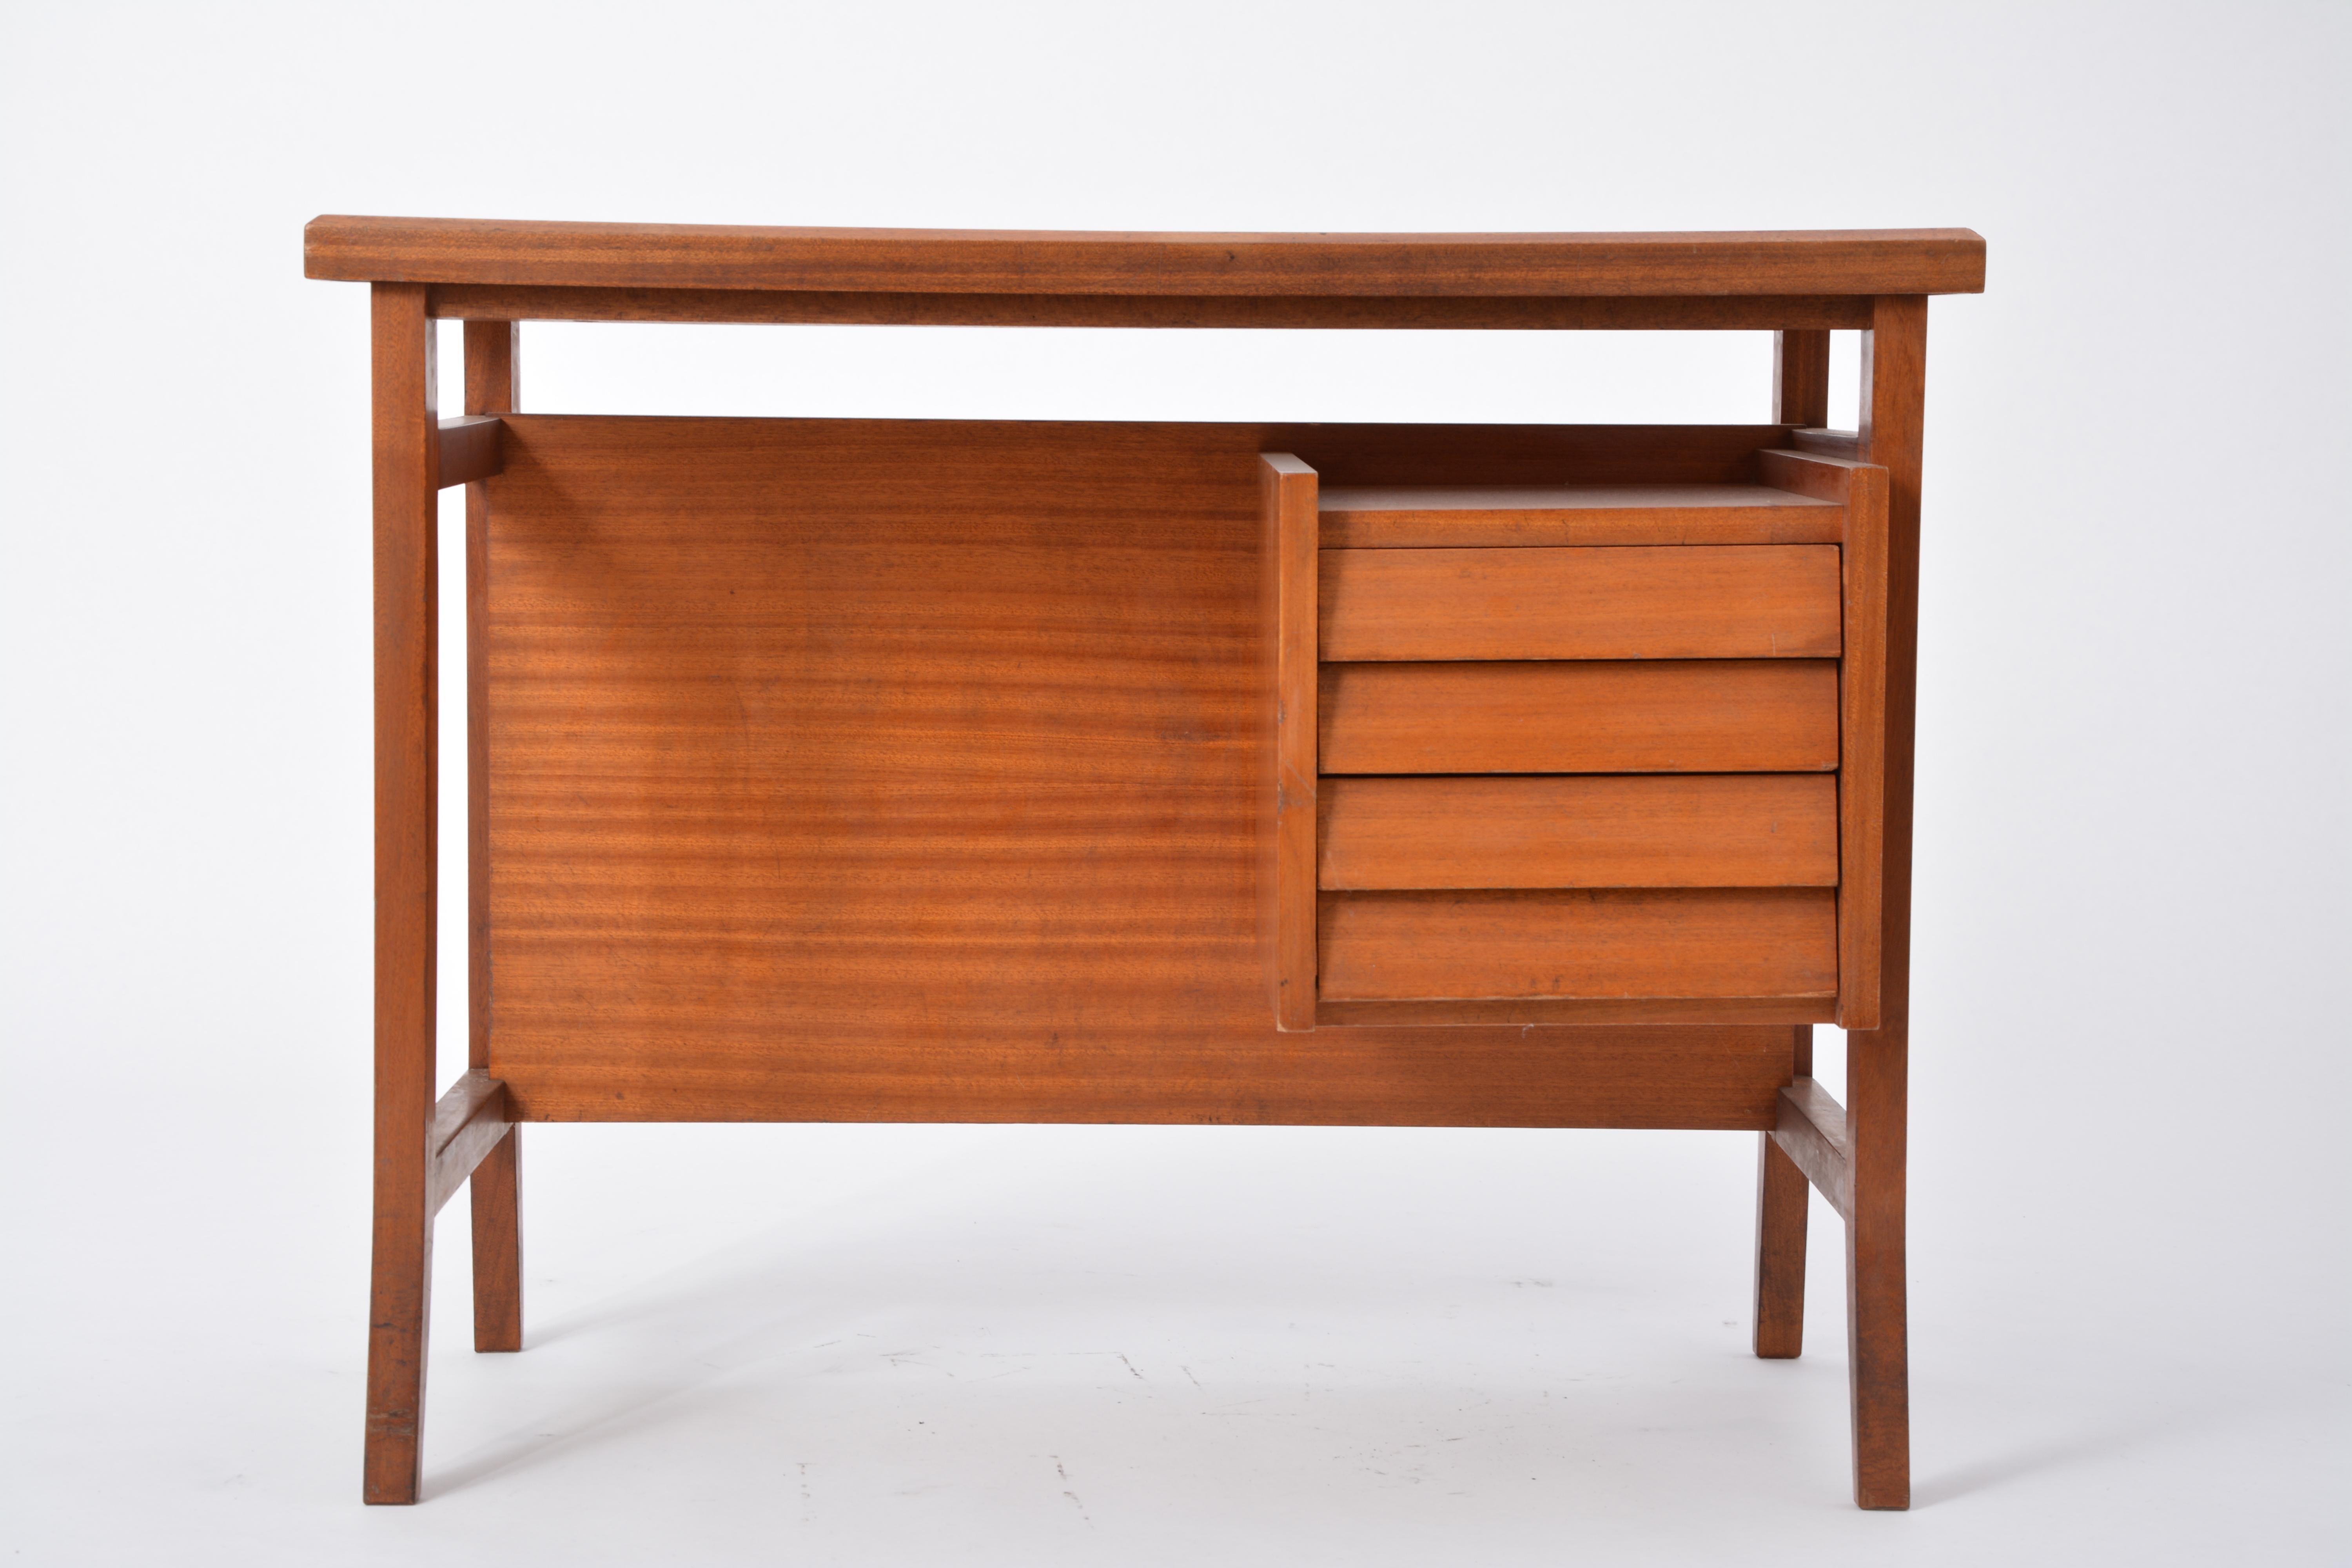 Small writing desk designed by Gio Ponti for Schirolli. Produced in the 1960s in Italy. The table has four drawers on the right part, is made of wood and has a formica top in light green.